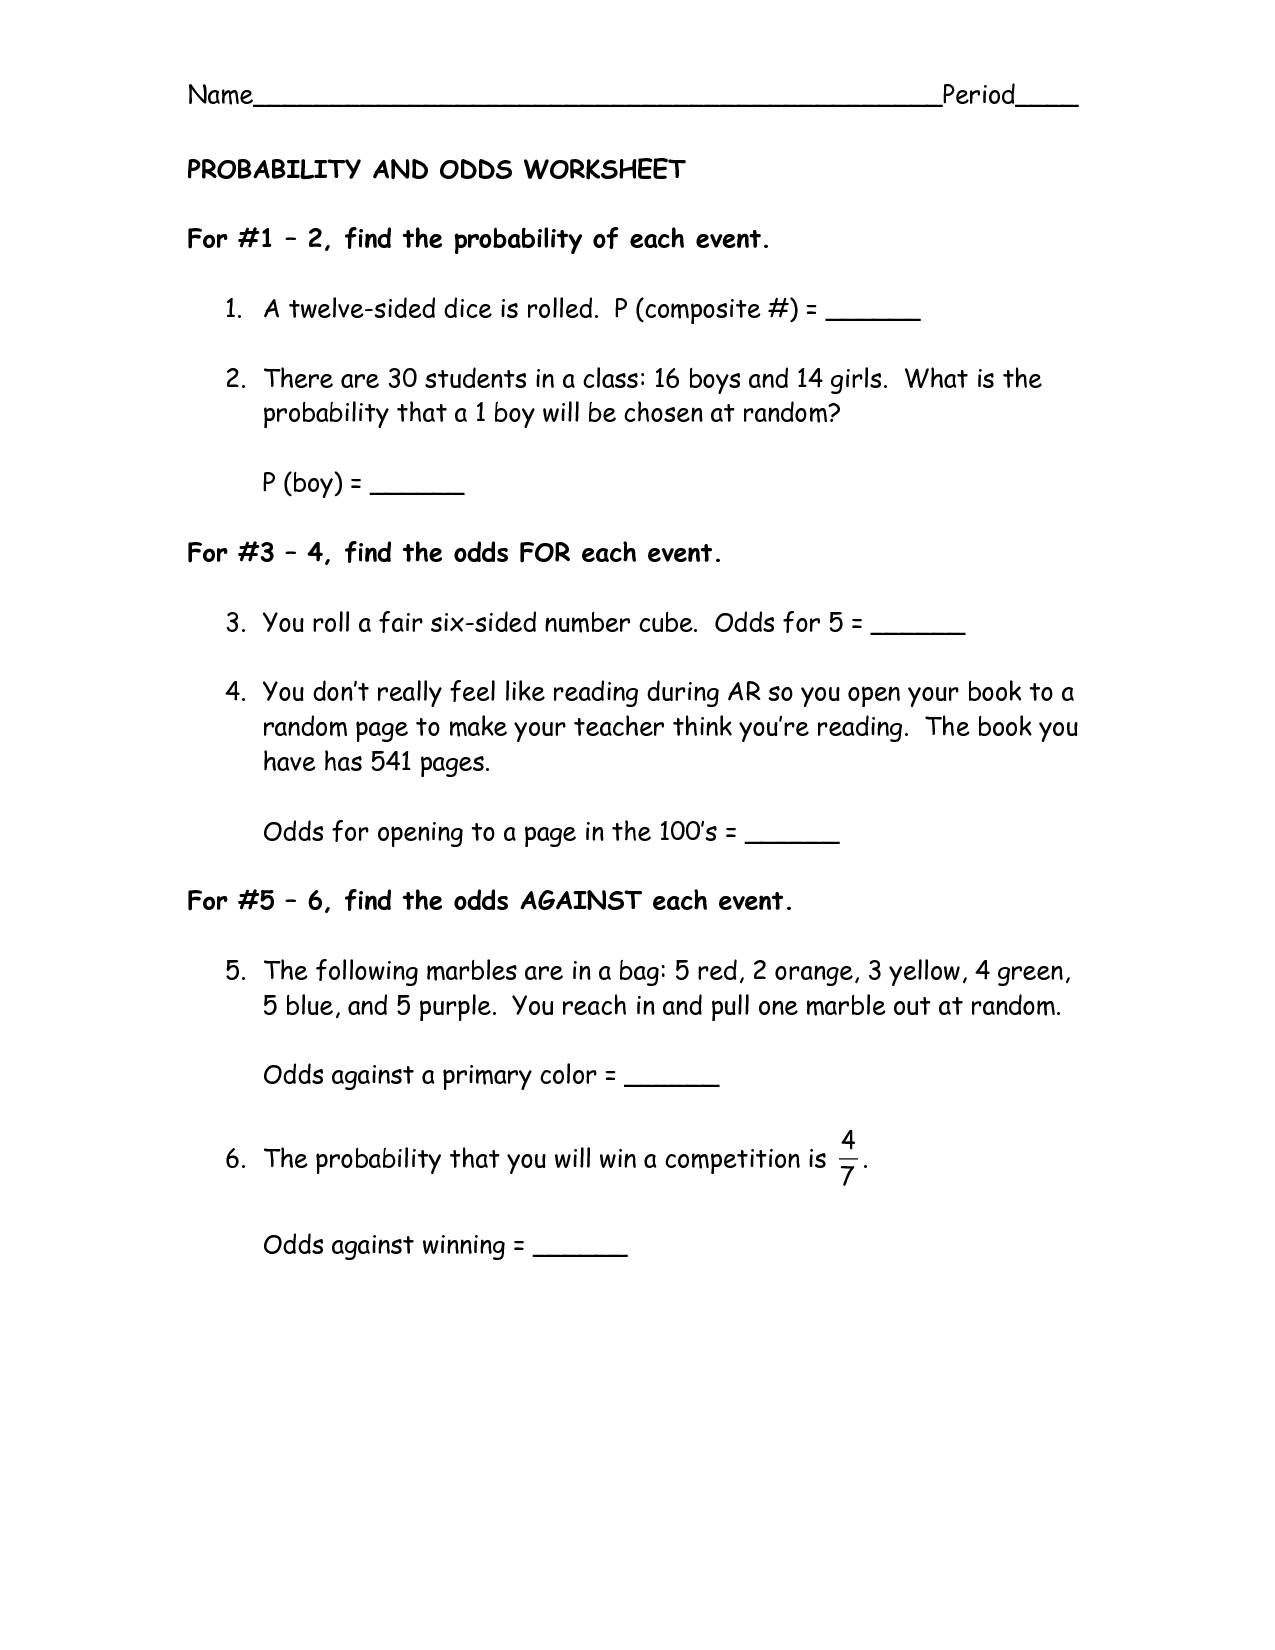 13-best-images-of-probability-worksheets-pdf-probability-worksheets-7th